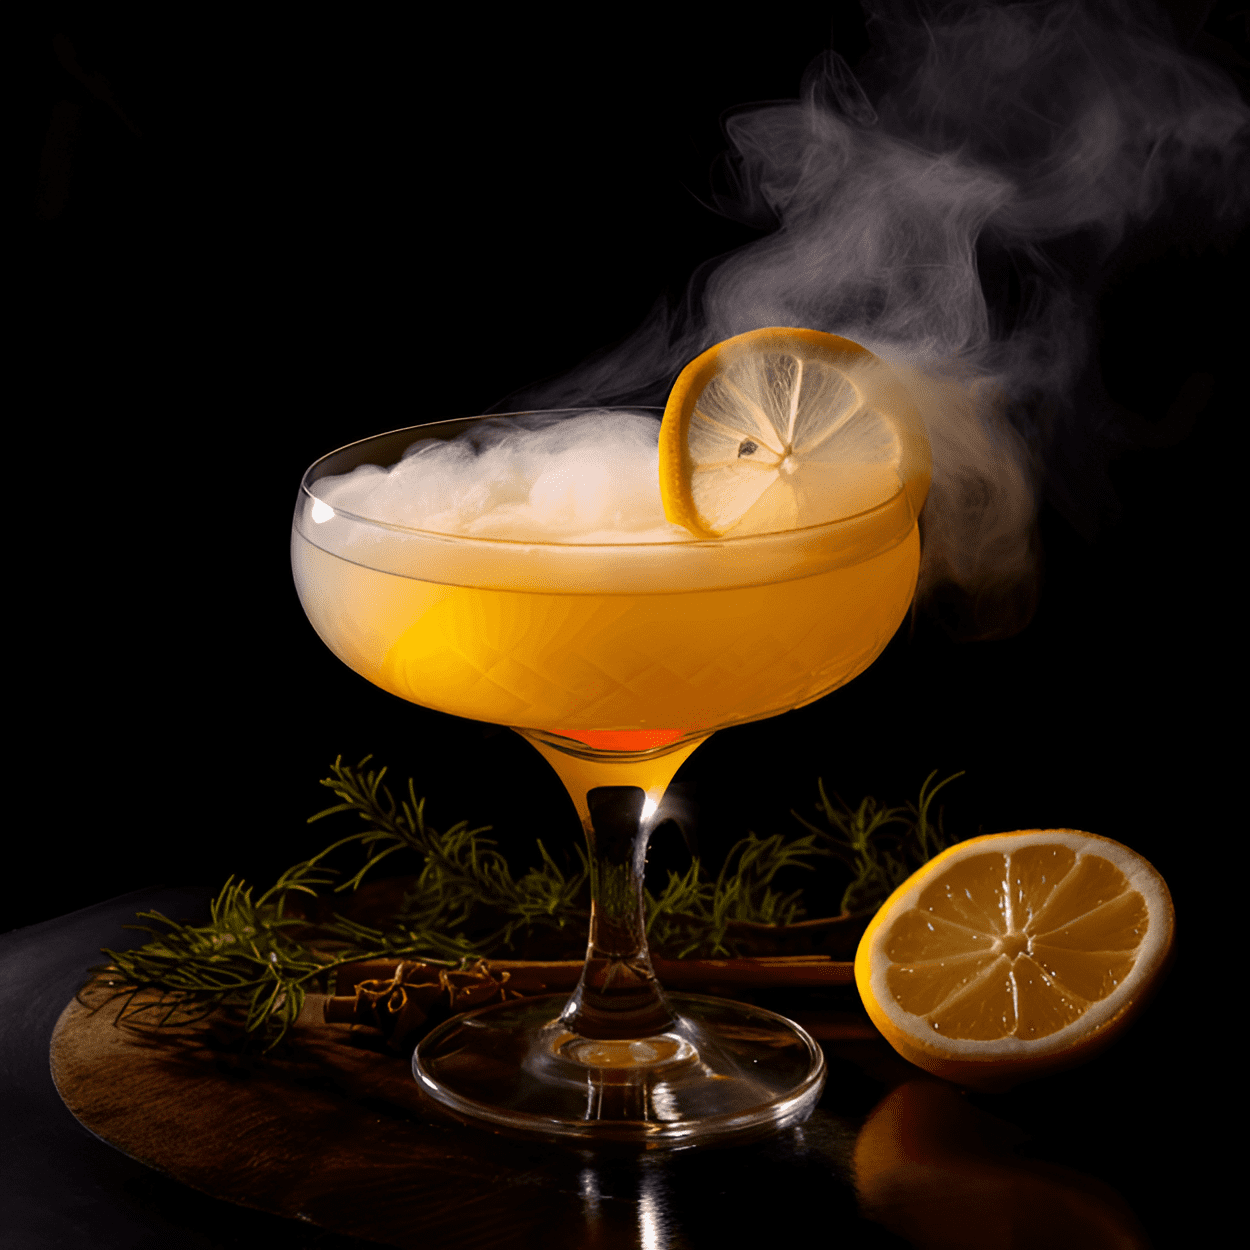 White Lightning Cocktail Recipe - The White Lightning cocktail is a potent, strong drink with a fiery kick. It has a robust, full-bodied flavor with a hint of sweetness from the sugar. The lemon juice adds a touch of sourness, balancing out the strong alcohol taste.